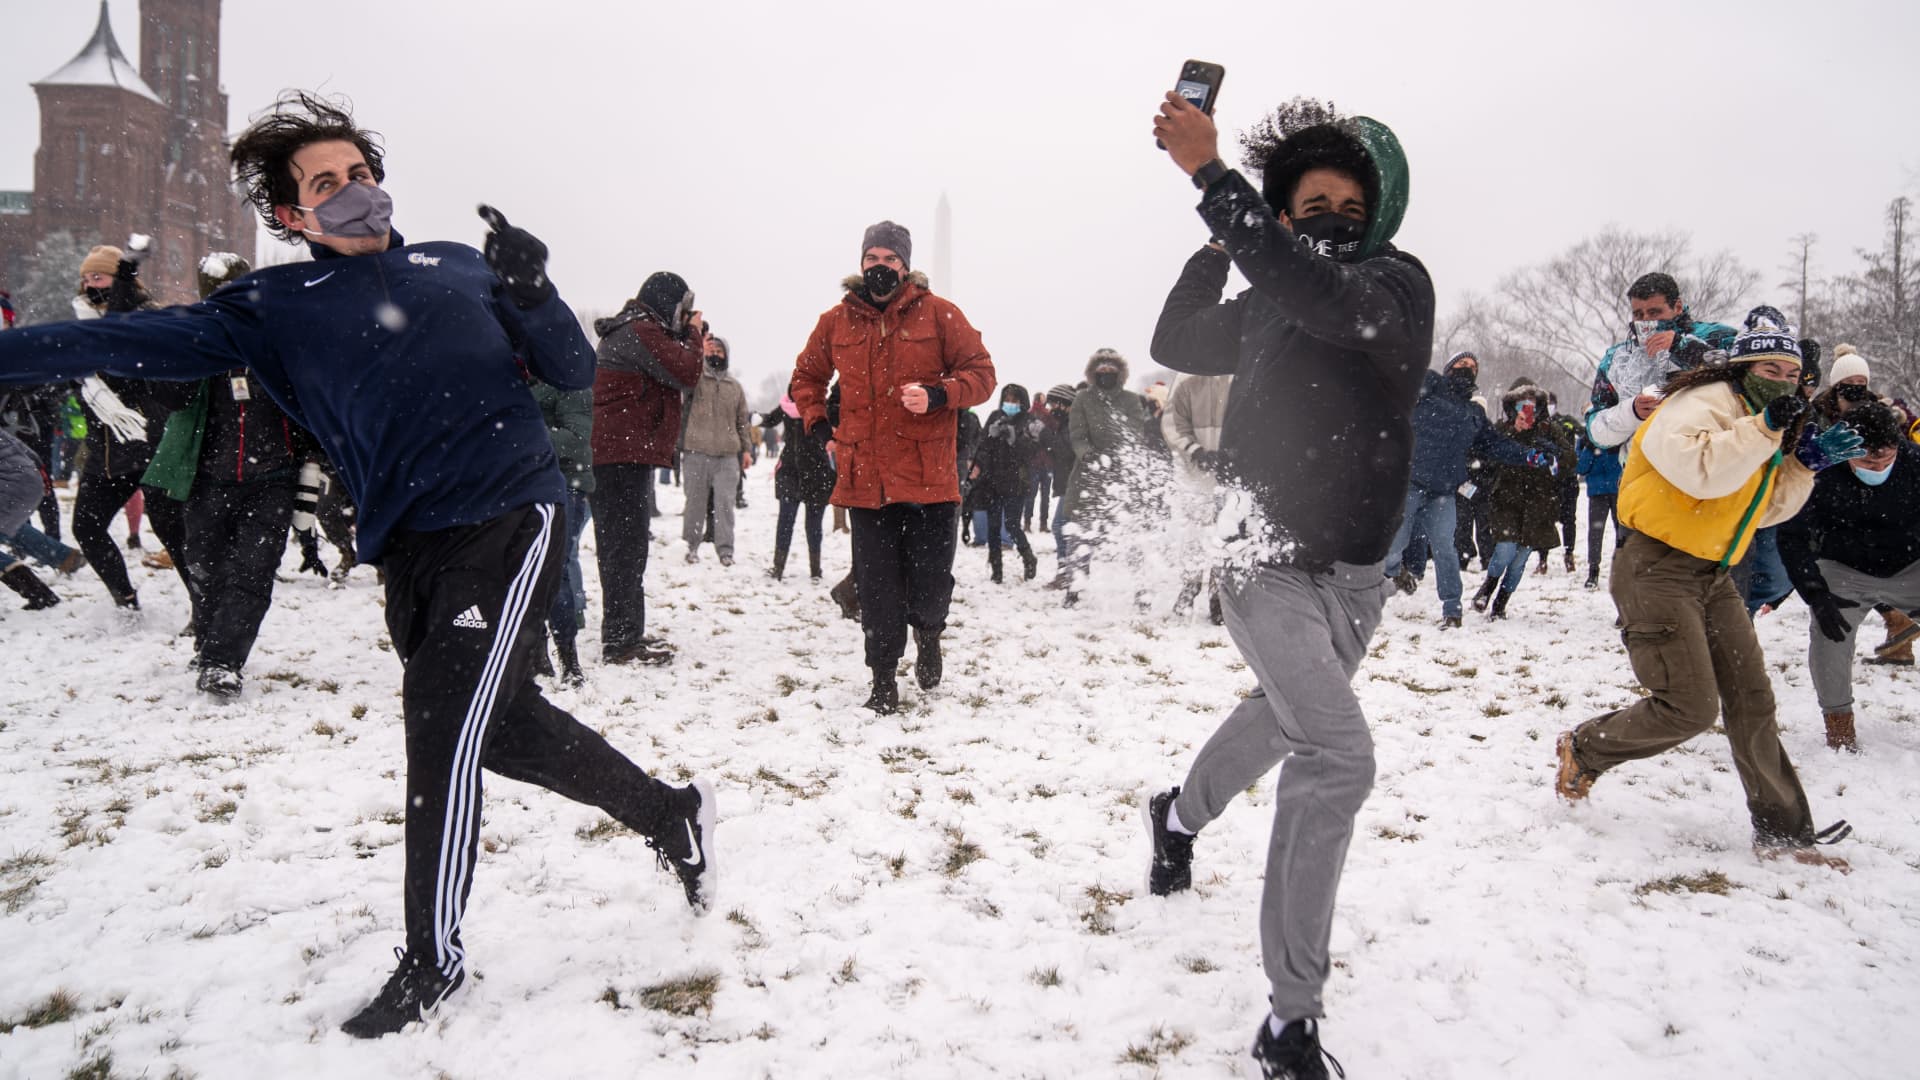 People take part in a snowball fight as snow blankets the National Mall on Sunday, Jan. 31, 2021 in Washington, DC.